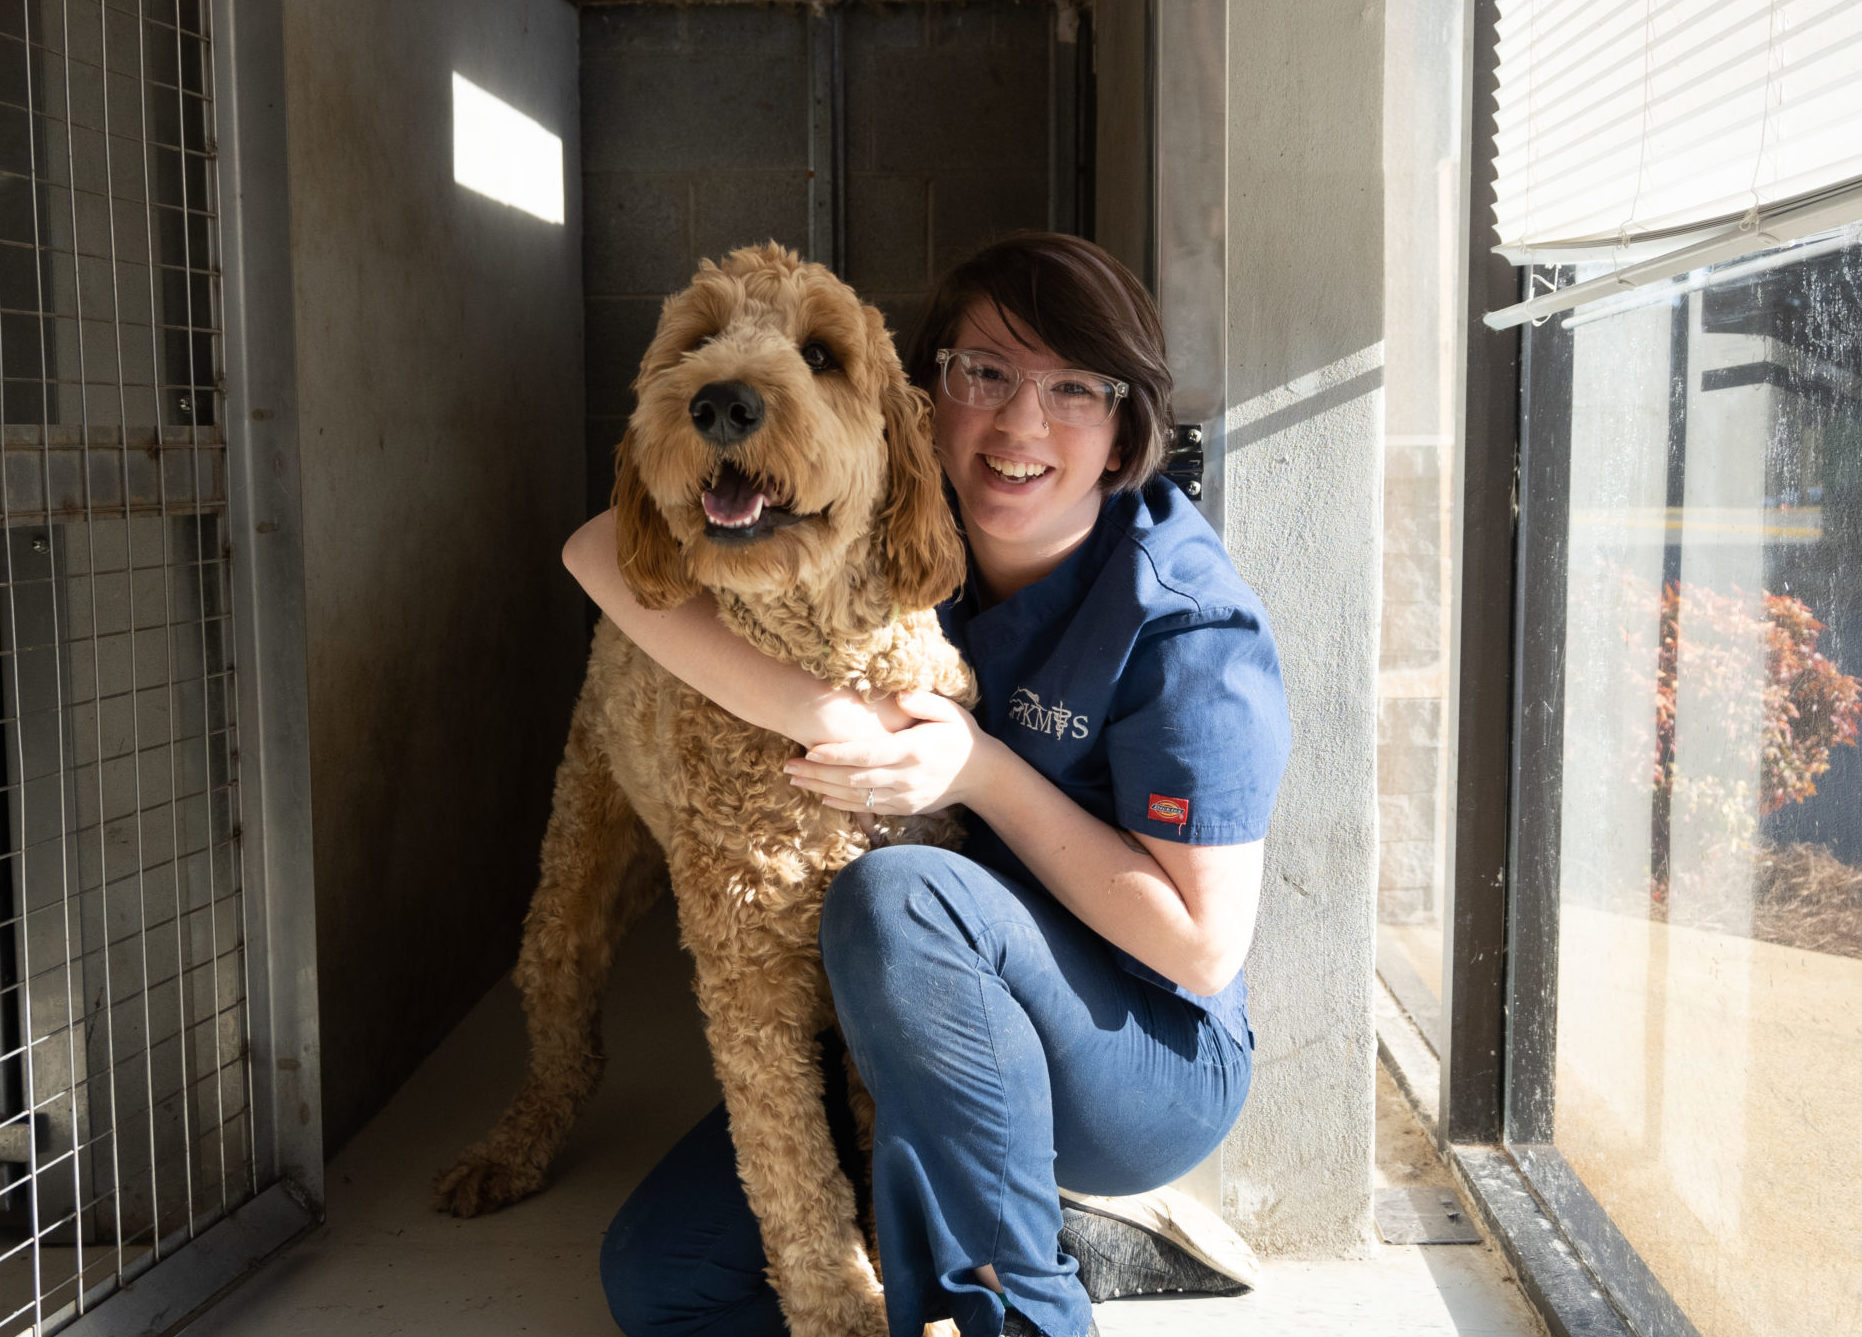 A large dog poses with a member of a veterinary staff during a boarding stay.